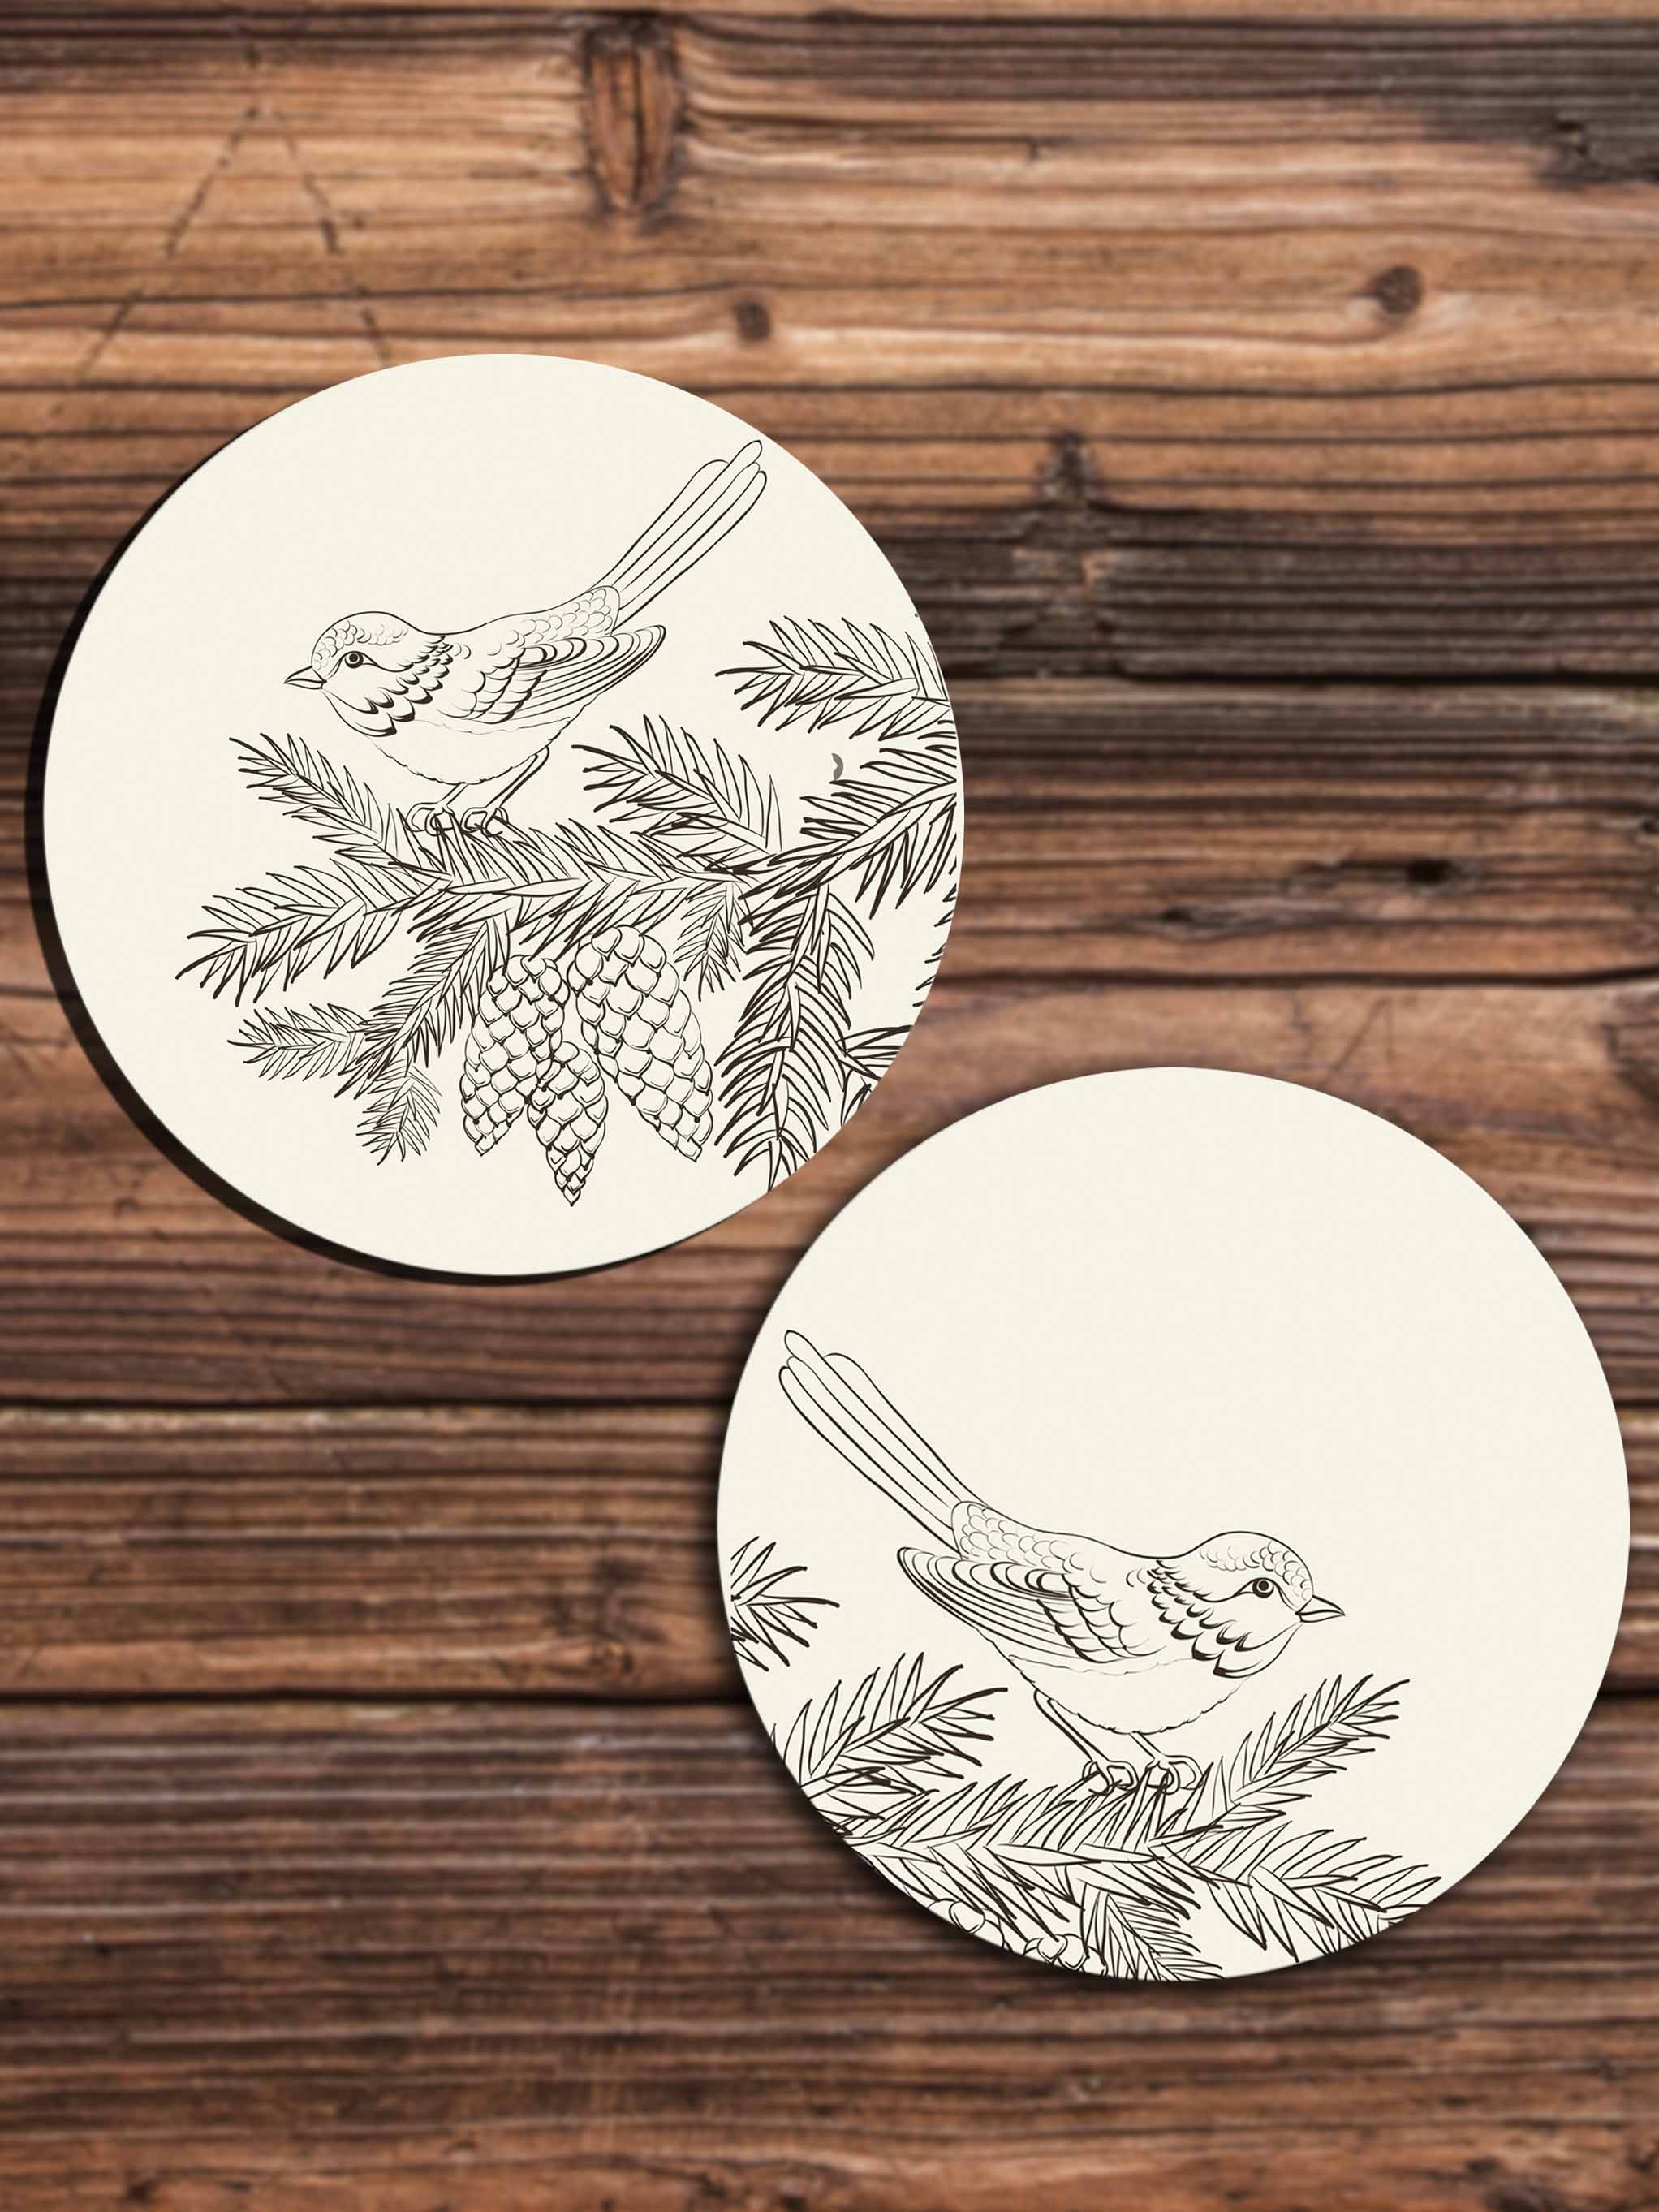 The Sparrow- Set of 2 Coasters